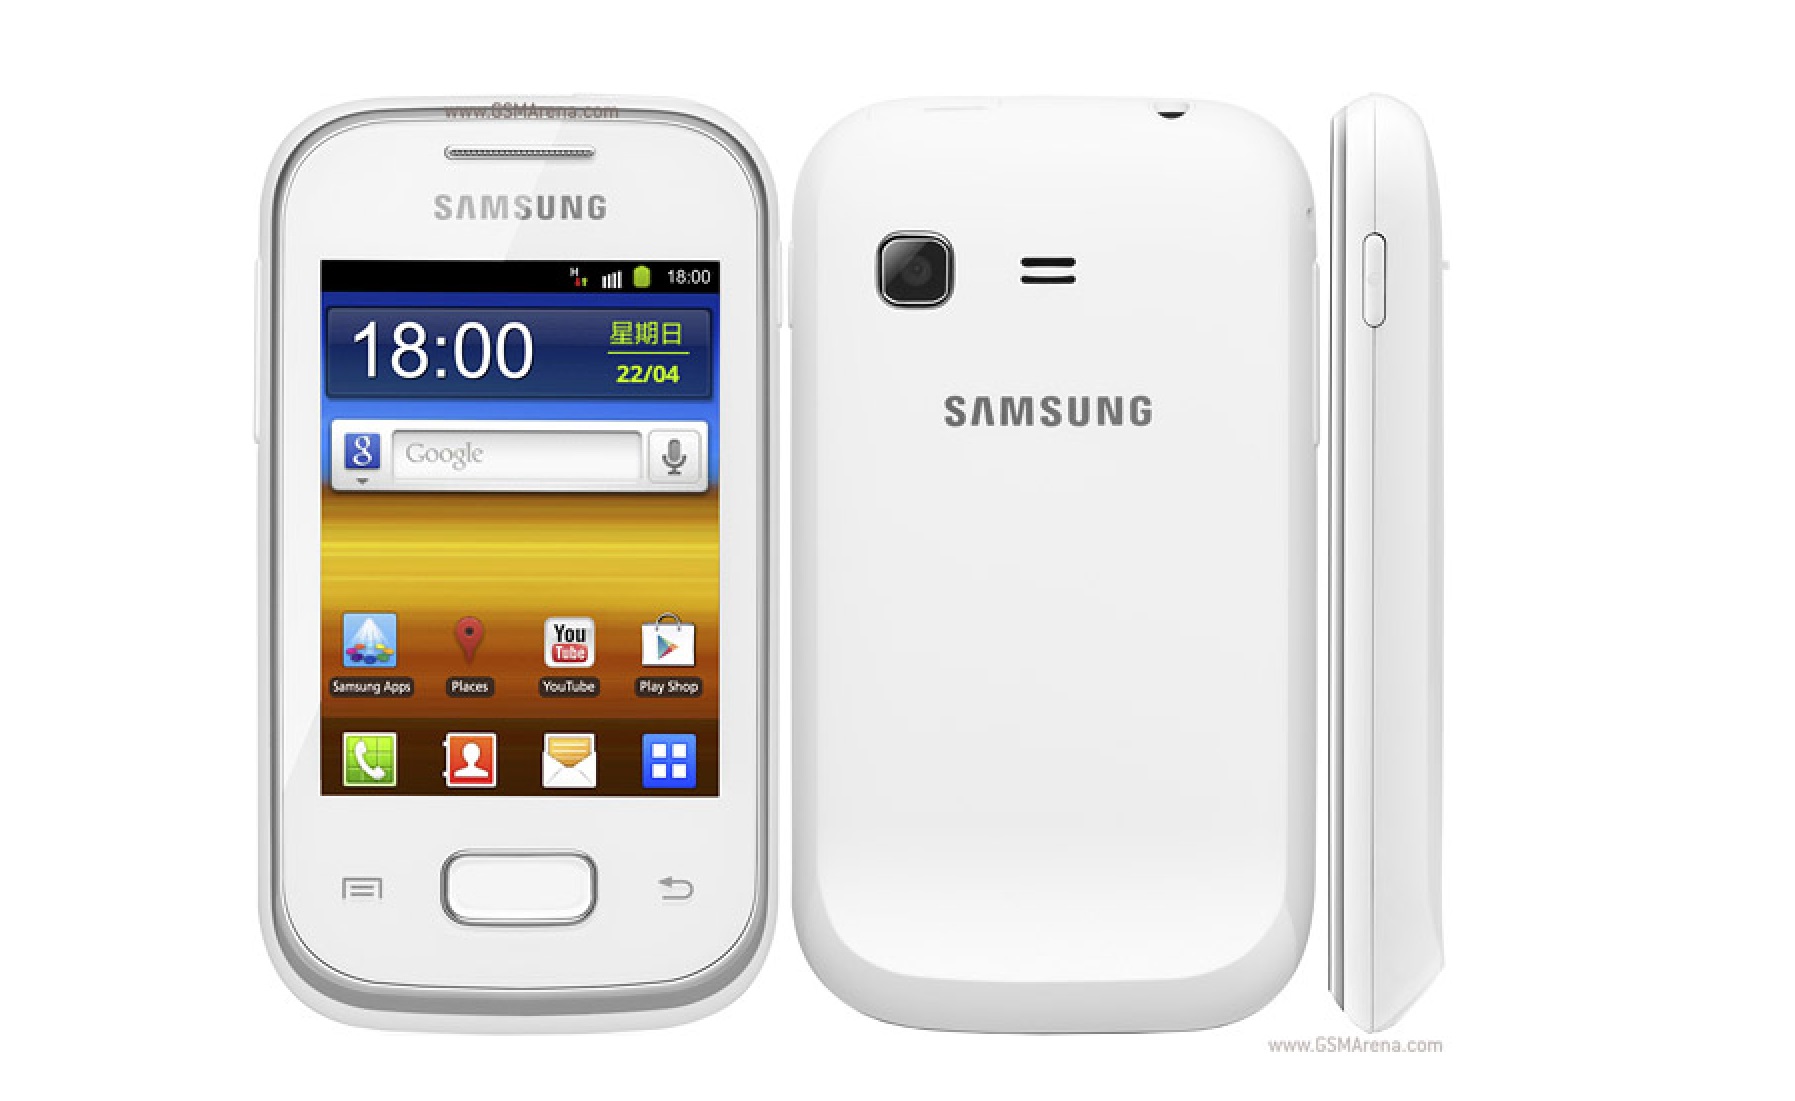 Details of Samsung Galaxy Pocket Plus Are Revealed